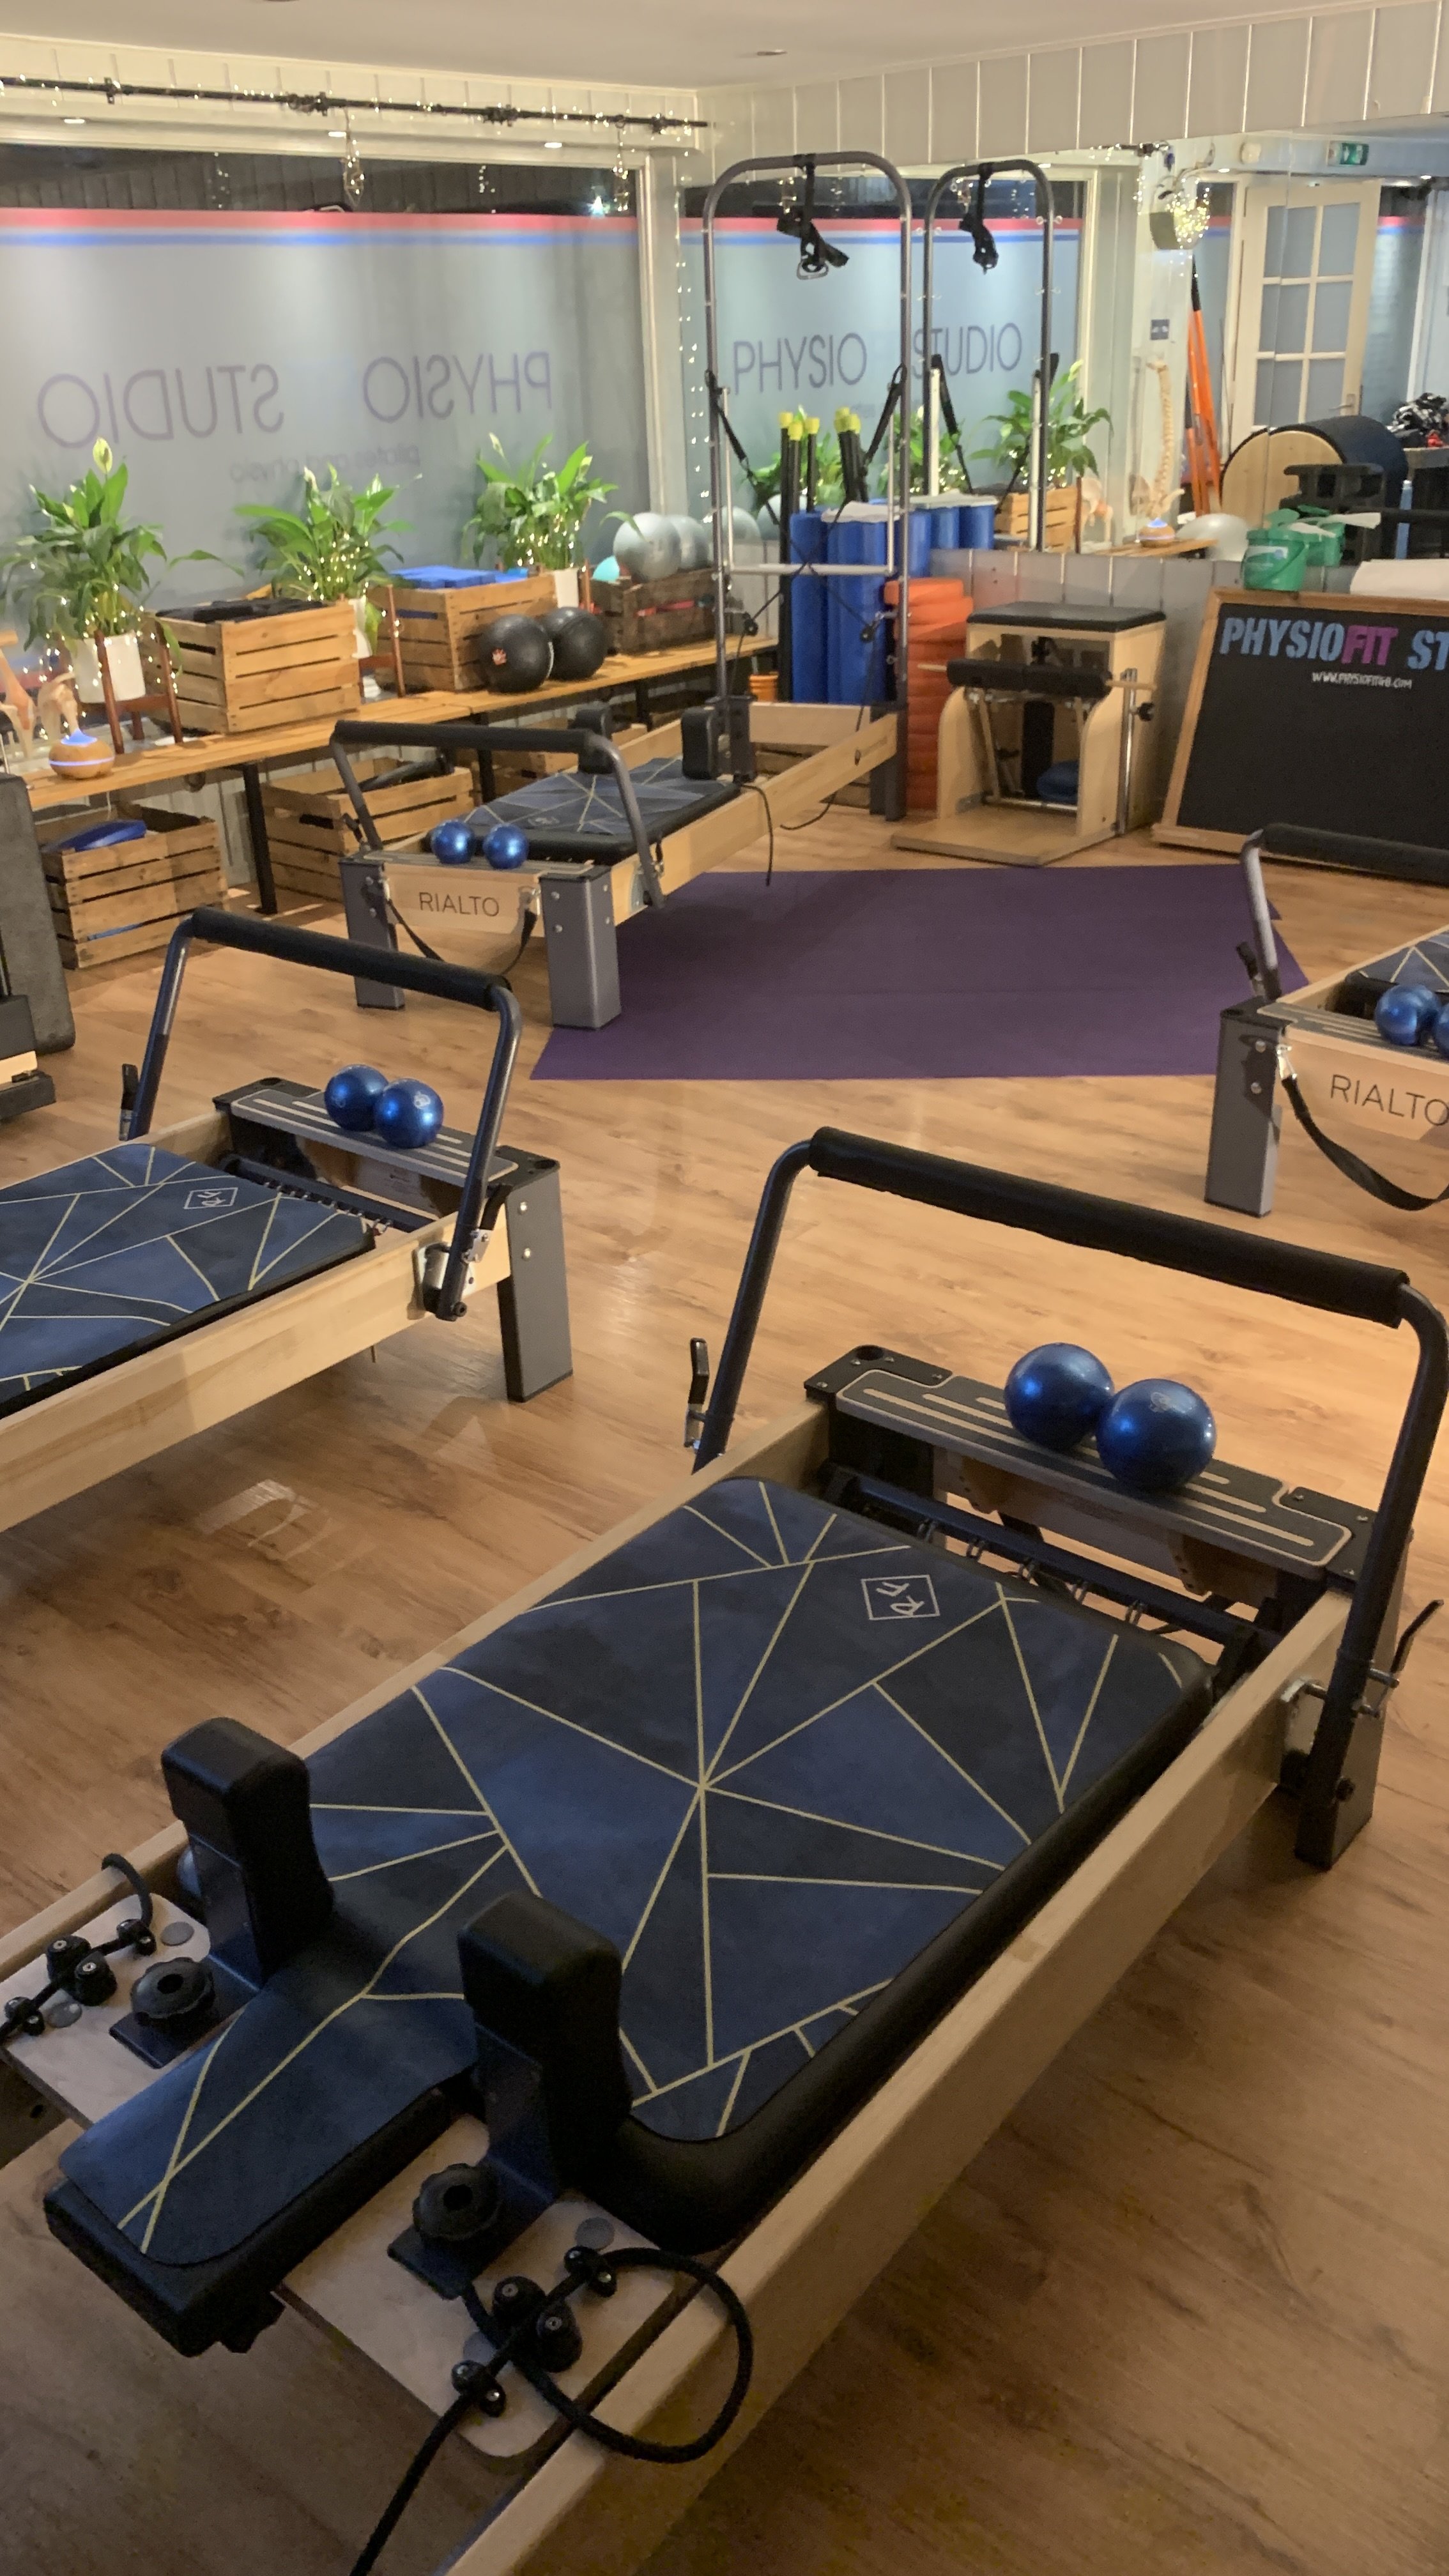 What is fitness pilates?  PhysioFitGB — PhysioFit Pilates & Physio Studio